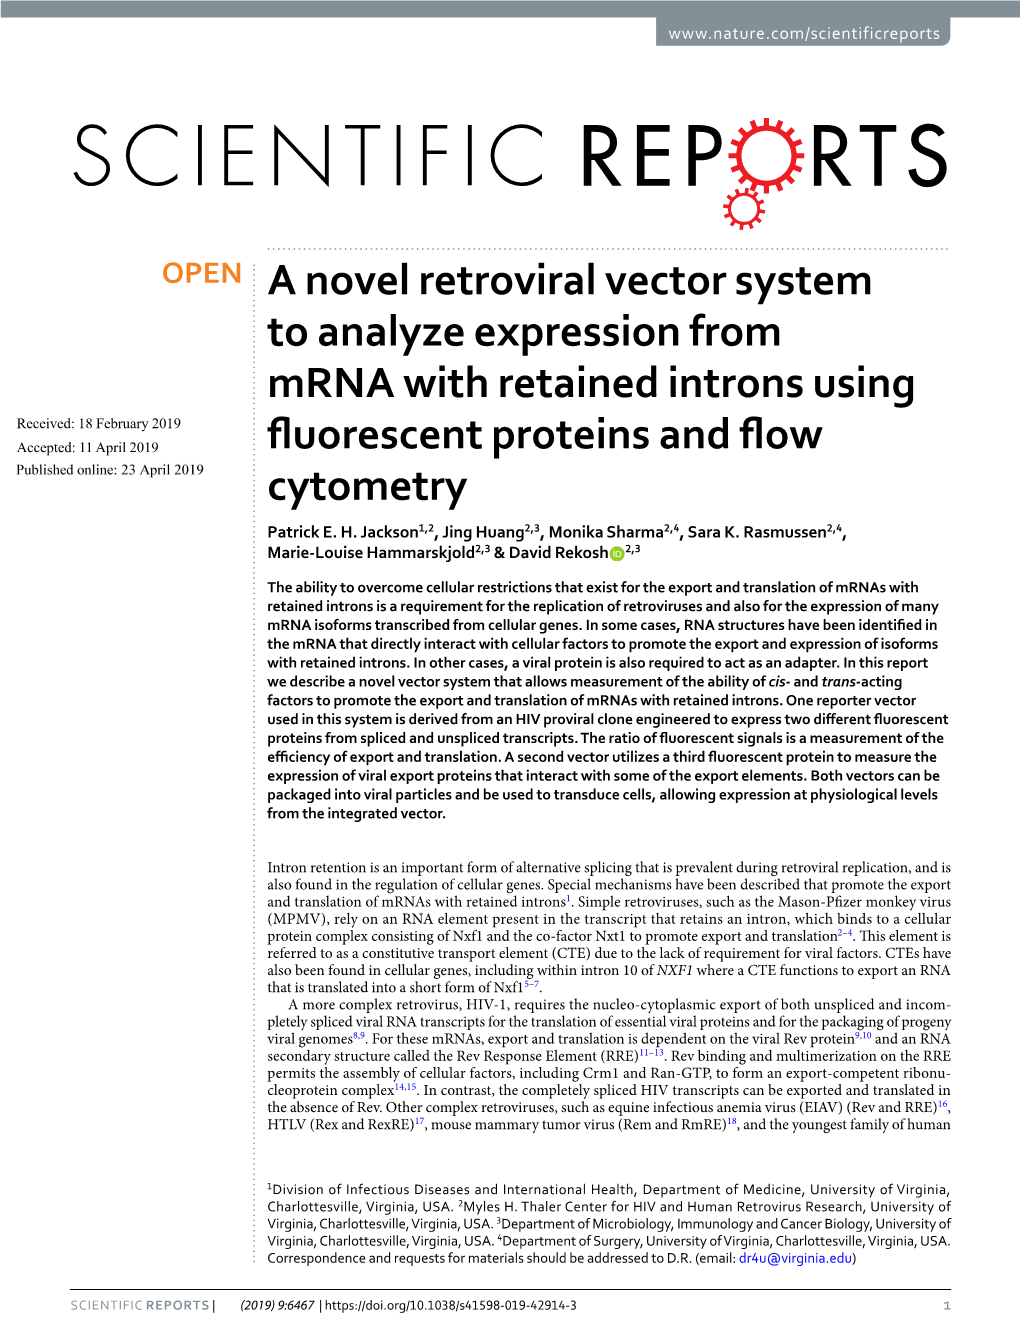 A Novel Retroviral Vector System to Analyze Expression from Mrna with Retained Introns Using Fluorescent Proteins and Flow Cytom